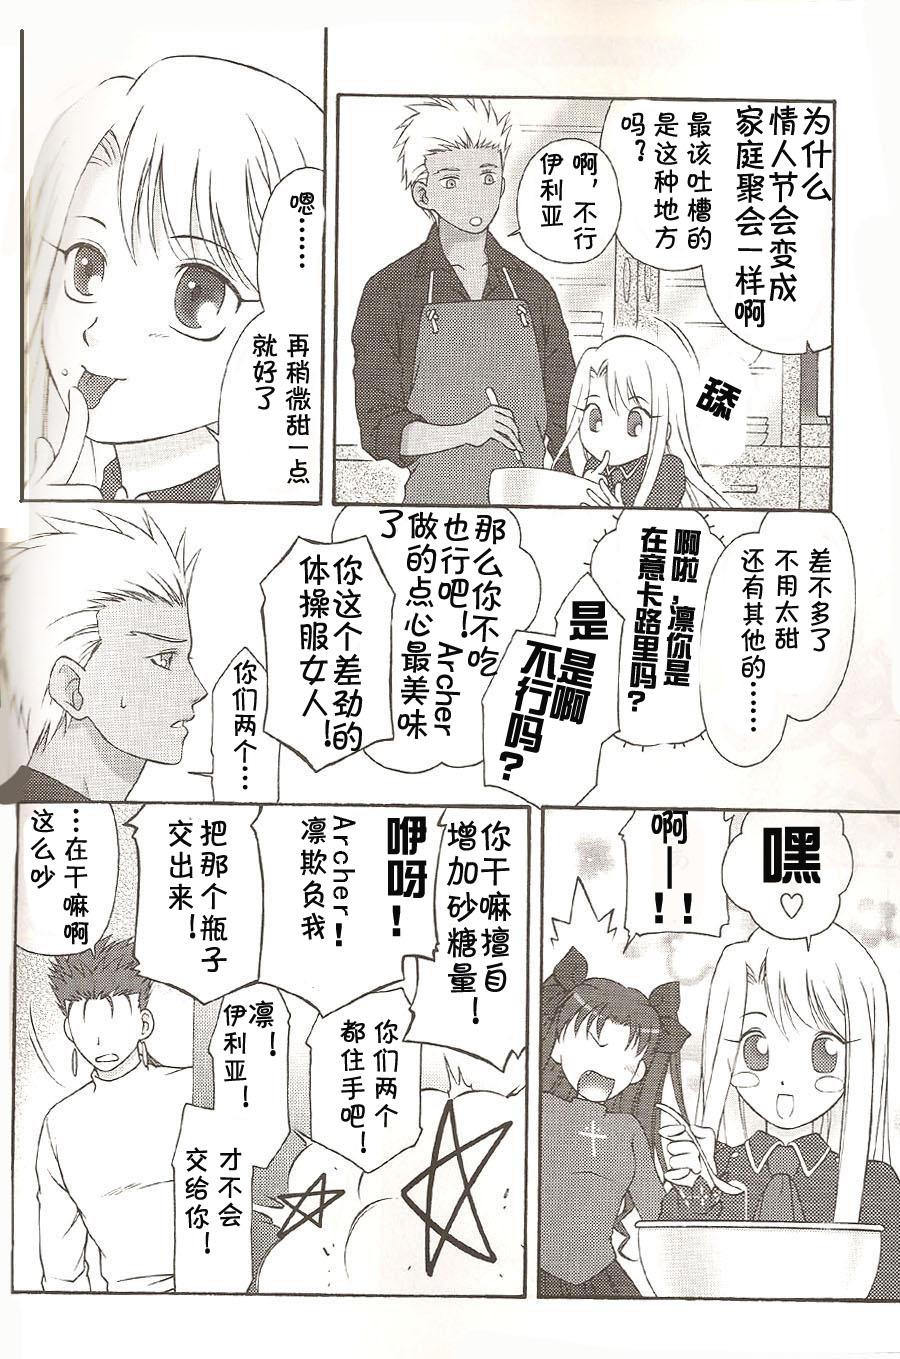 Fat Pussy SAIHEN - Fate stay night Fate hollow ataraxia Boy - Page 9